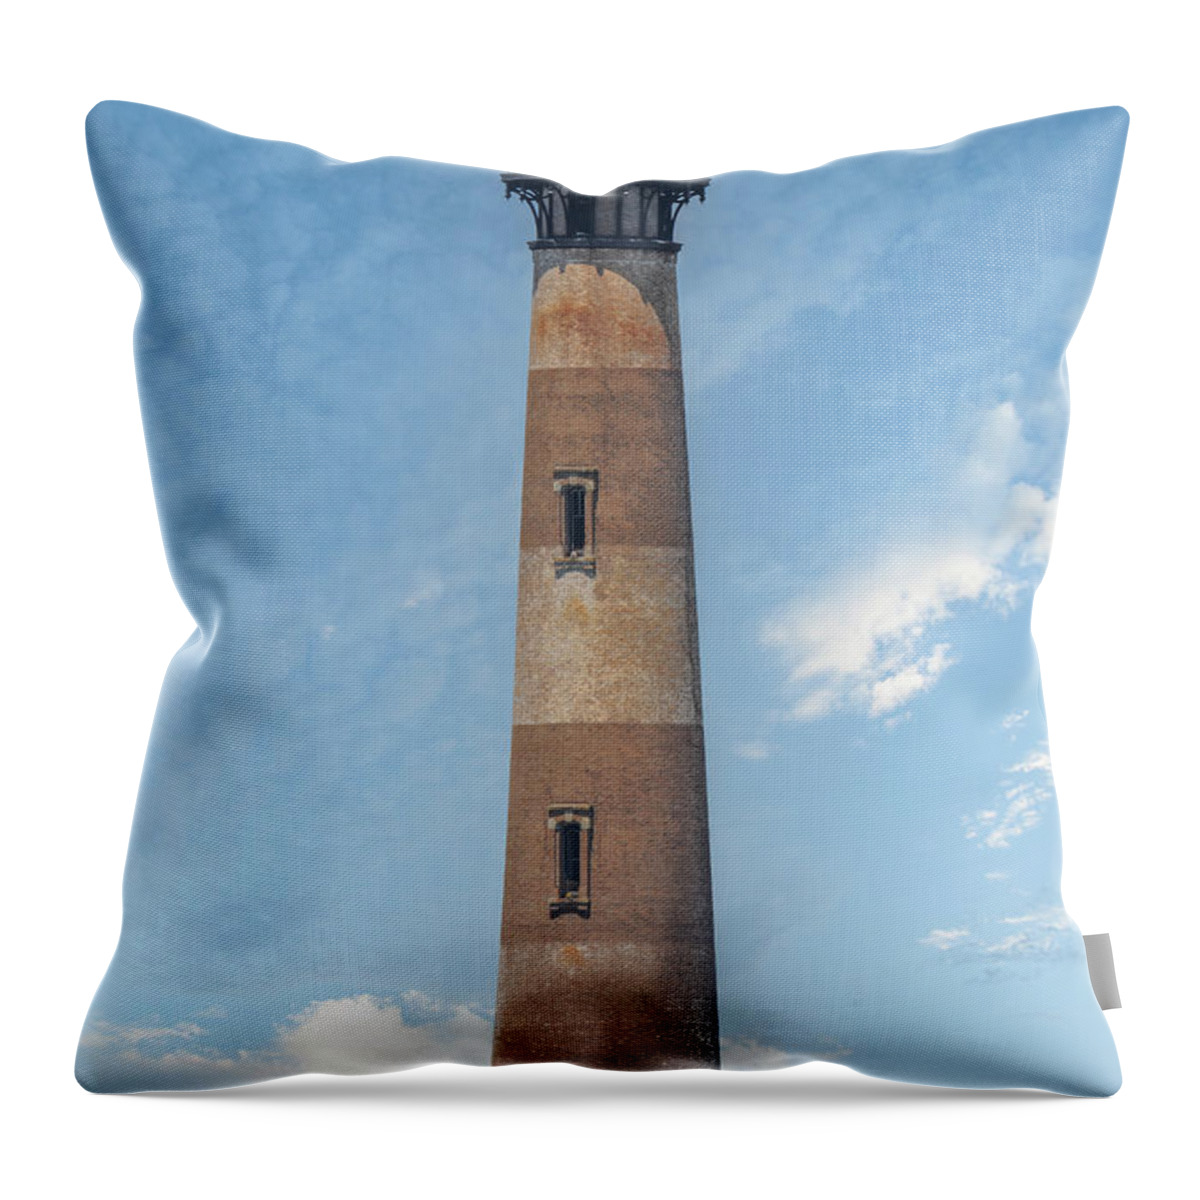 Morris Island Lighthouse Throw Pillow featuring the photograph Morris Island Lighthouse - Charleston South Carolina - Standing Tall by Dale Powell